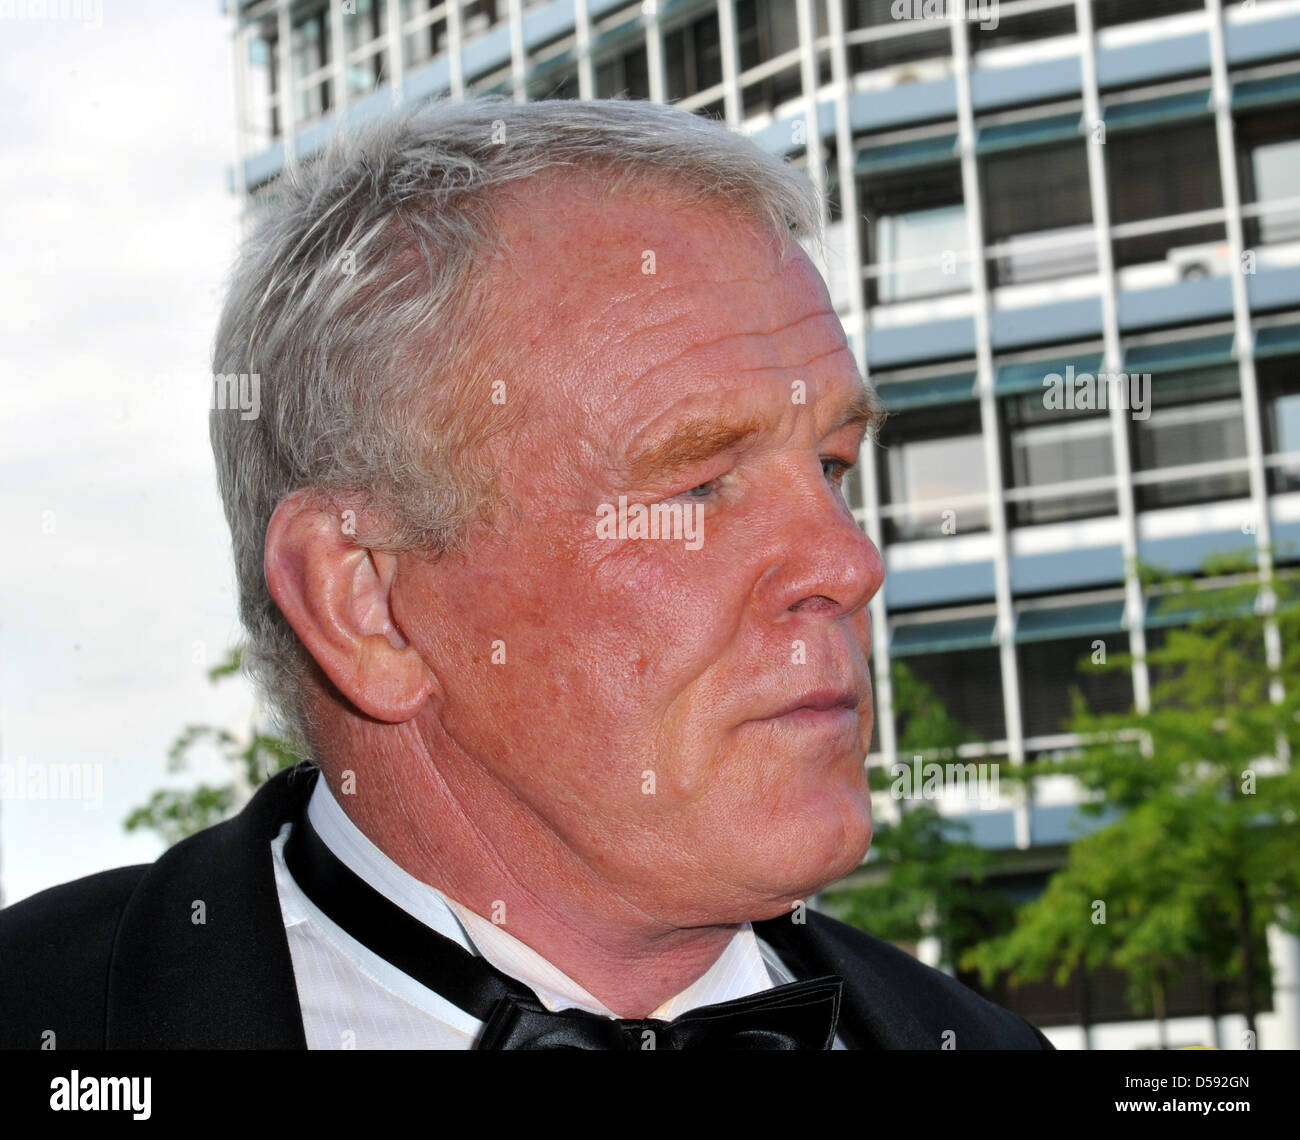 Hollywood actor Nick Nolte arrives to Unicef Gala in Offenburg, Germany, 07 June 2010. Four days previous to the FIFA World Cup 2010 in South Africa, celebrities campaign their talents for children in need in Africa. With the event of the UN International Children's Emergency Fund and the Offenburger Burda Media Park Publisher, the poverty of children in Africa is supposed to be br Stock Photo